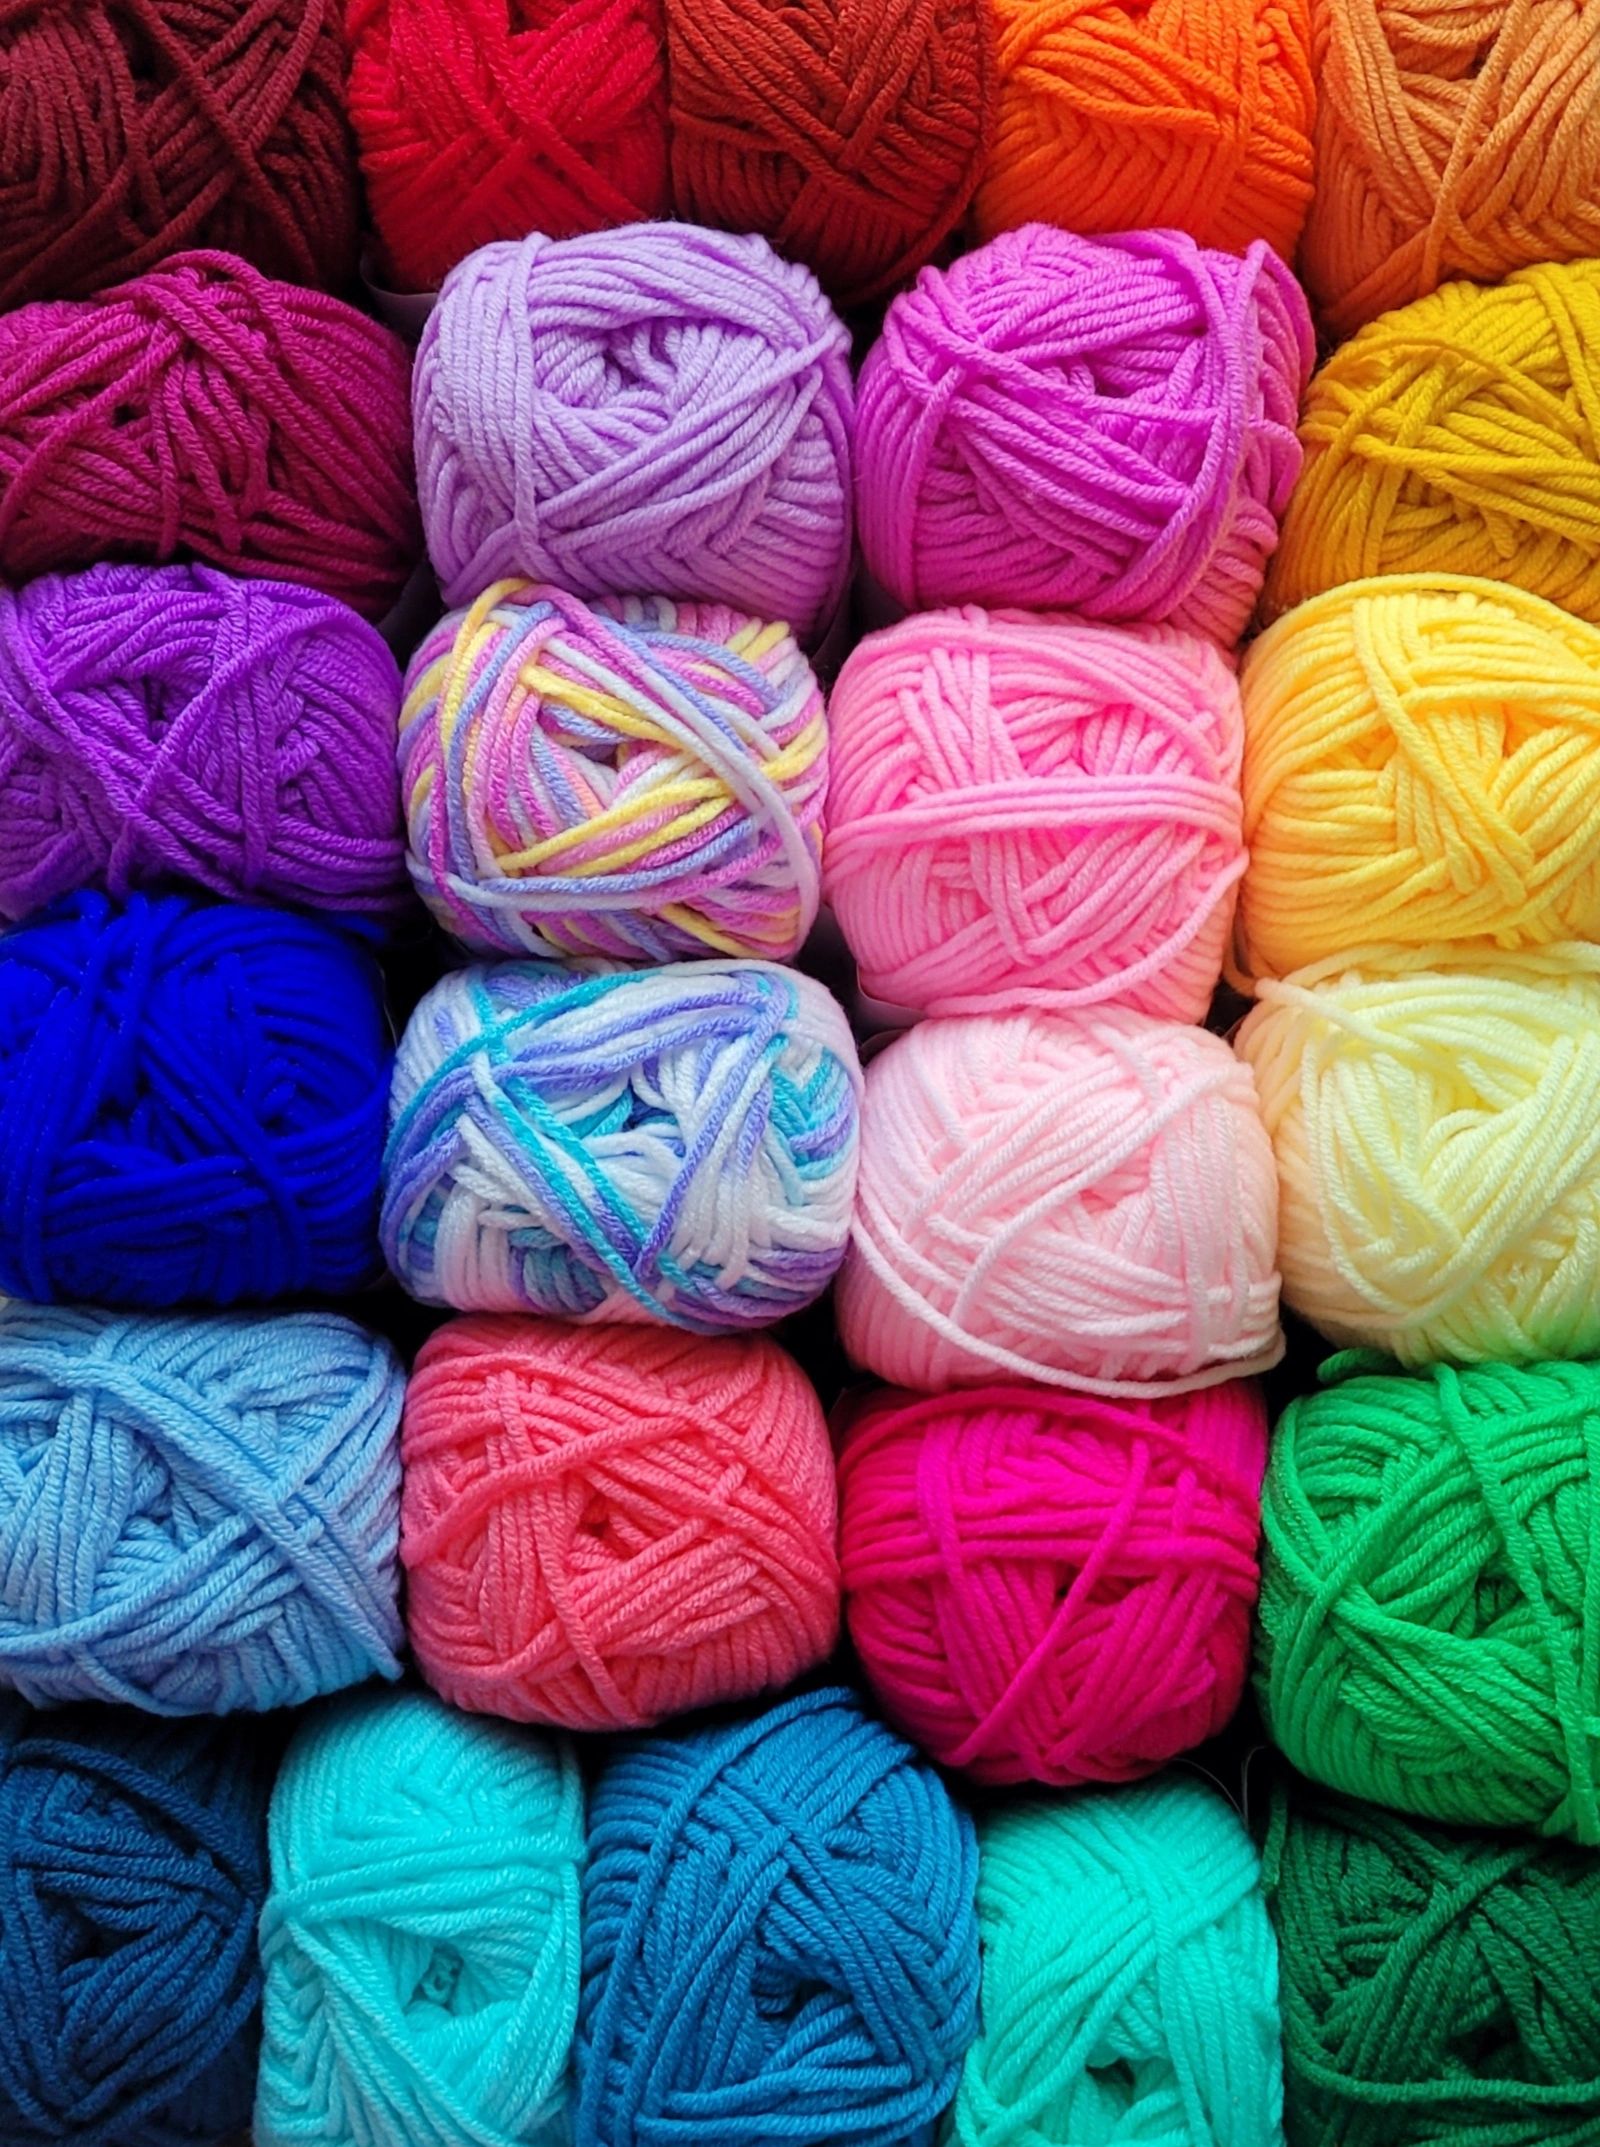 Places to Buy | Kitteknits